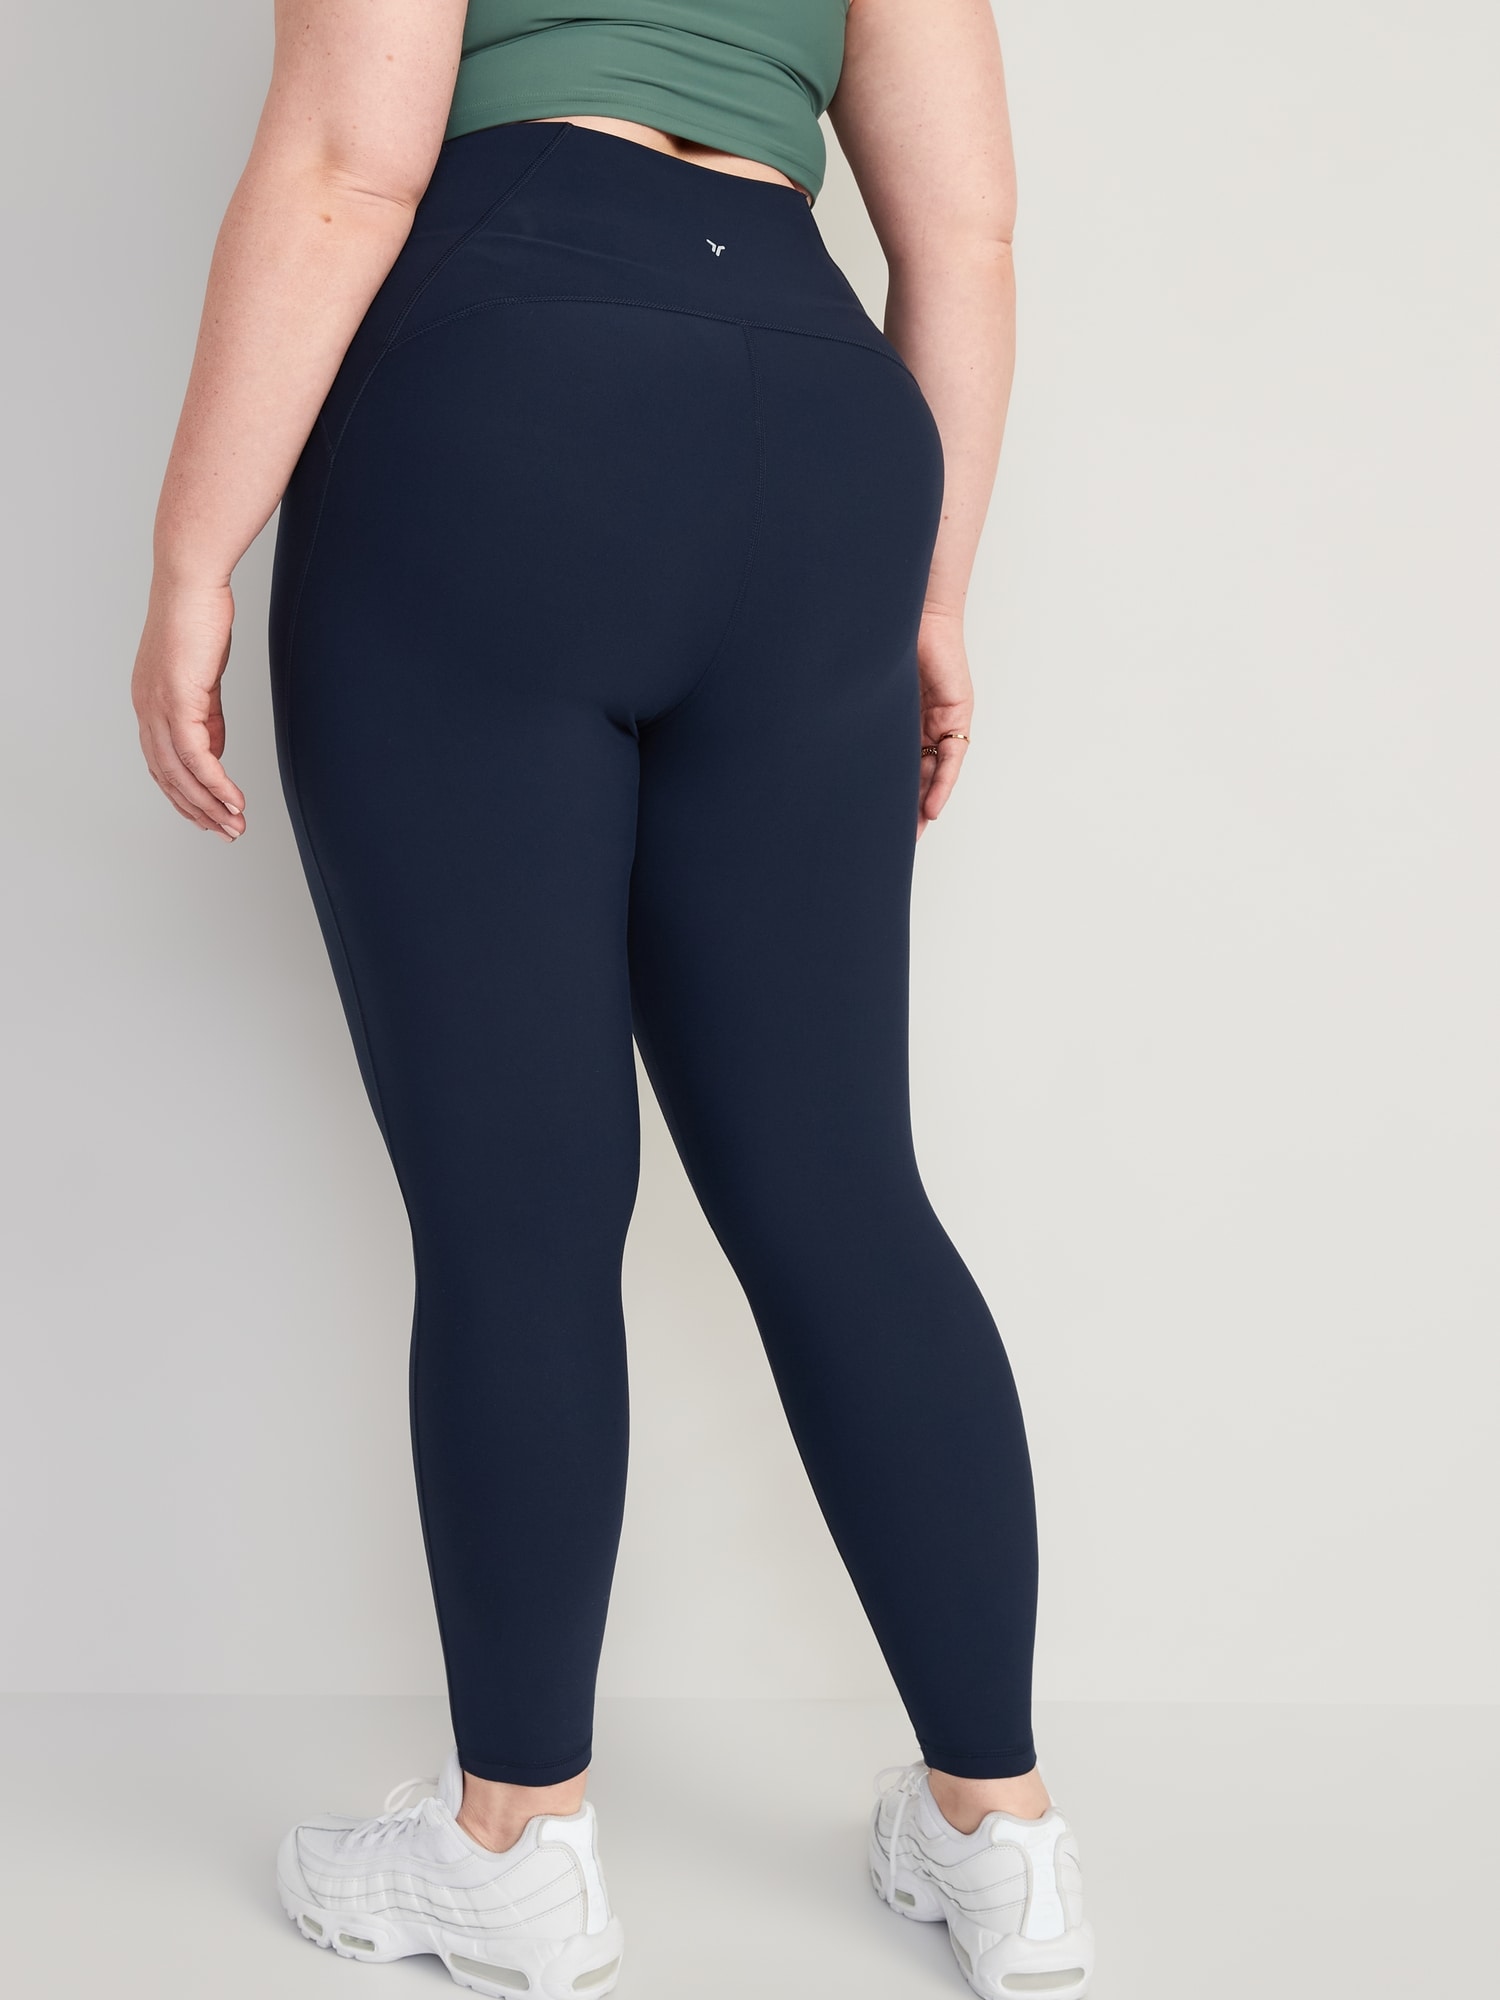 Olive Buttery Soft EXTRA PLUS SIZE Leggings 2X-4X